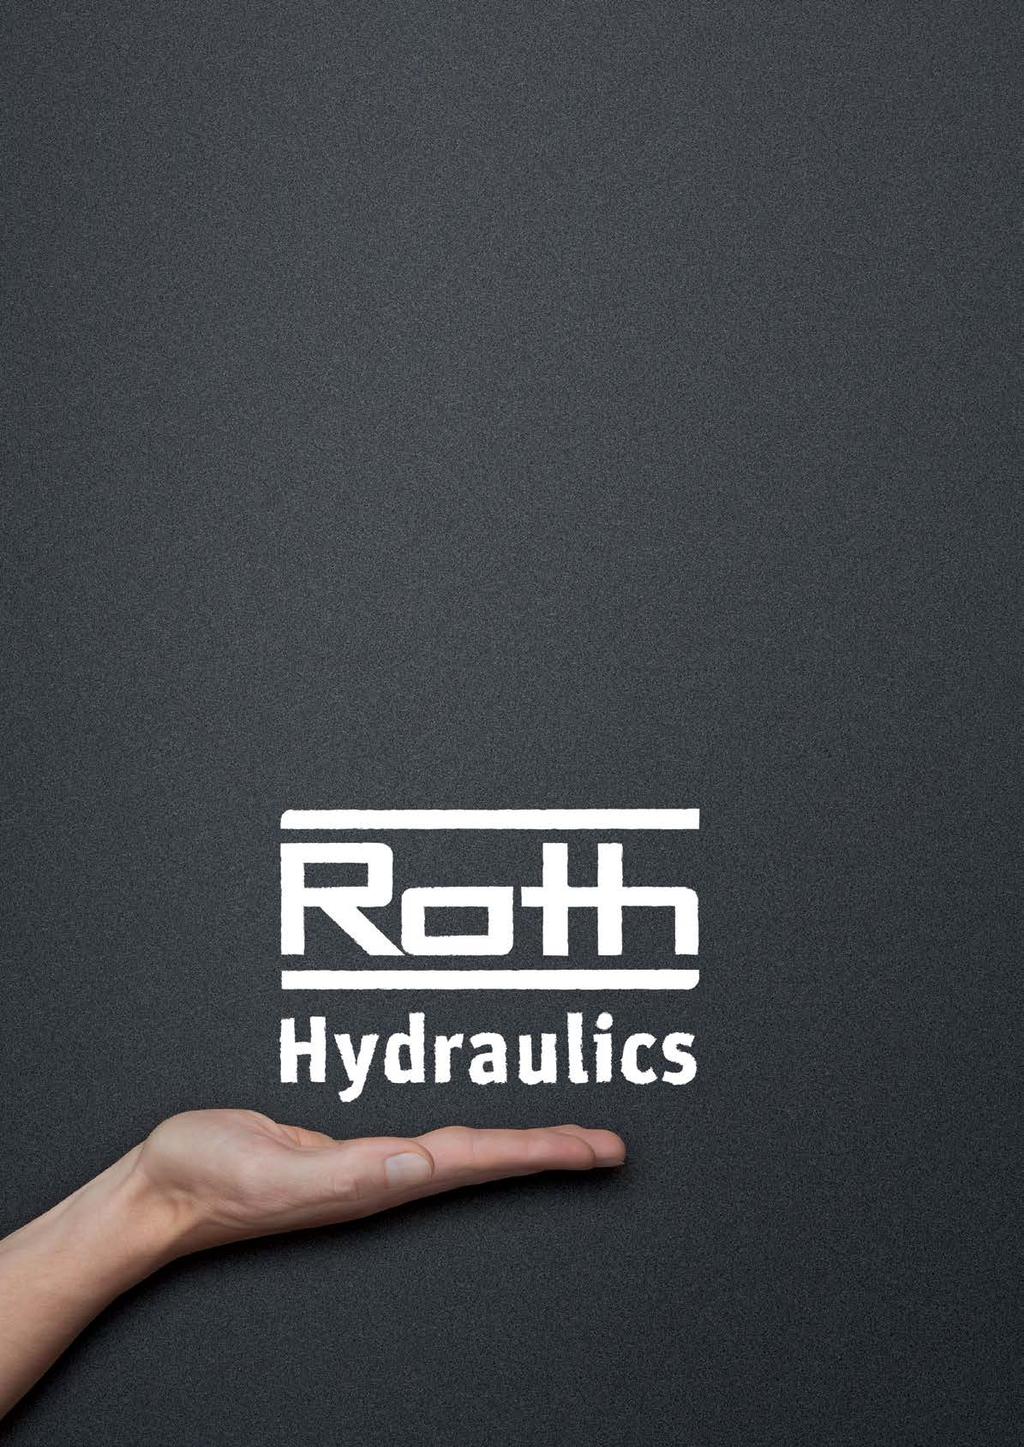 Welcome to Roth Hydraulics We develop and produce custom designed products and systems for fluid technology. Our core products are hydraulic energy accumulator systems.